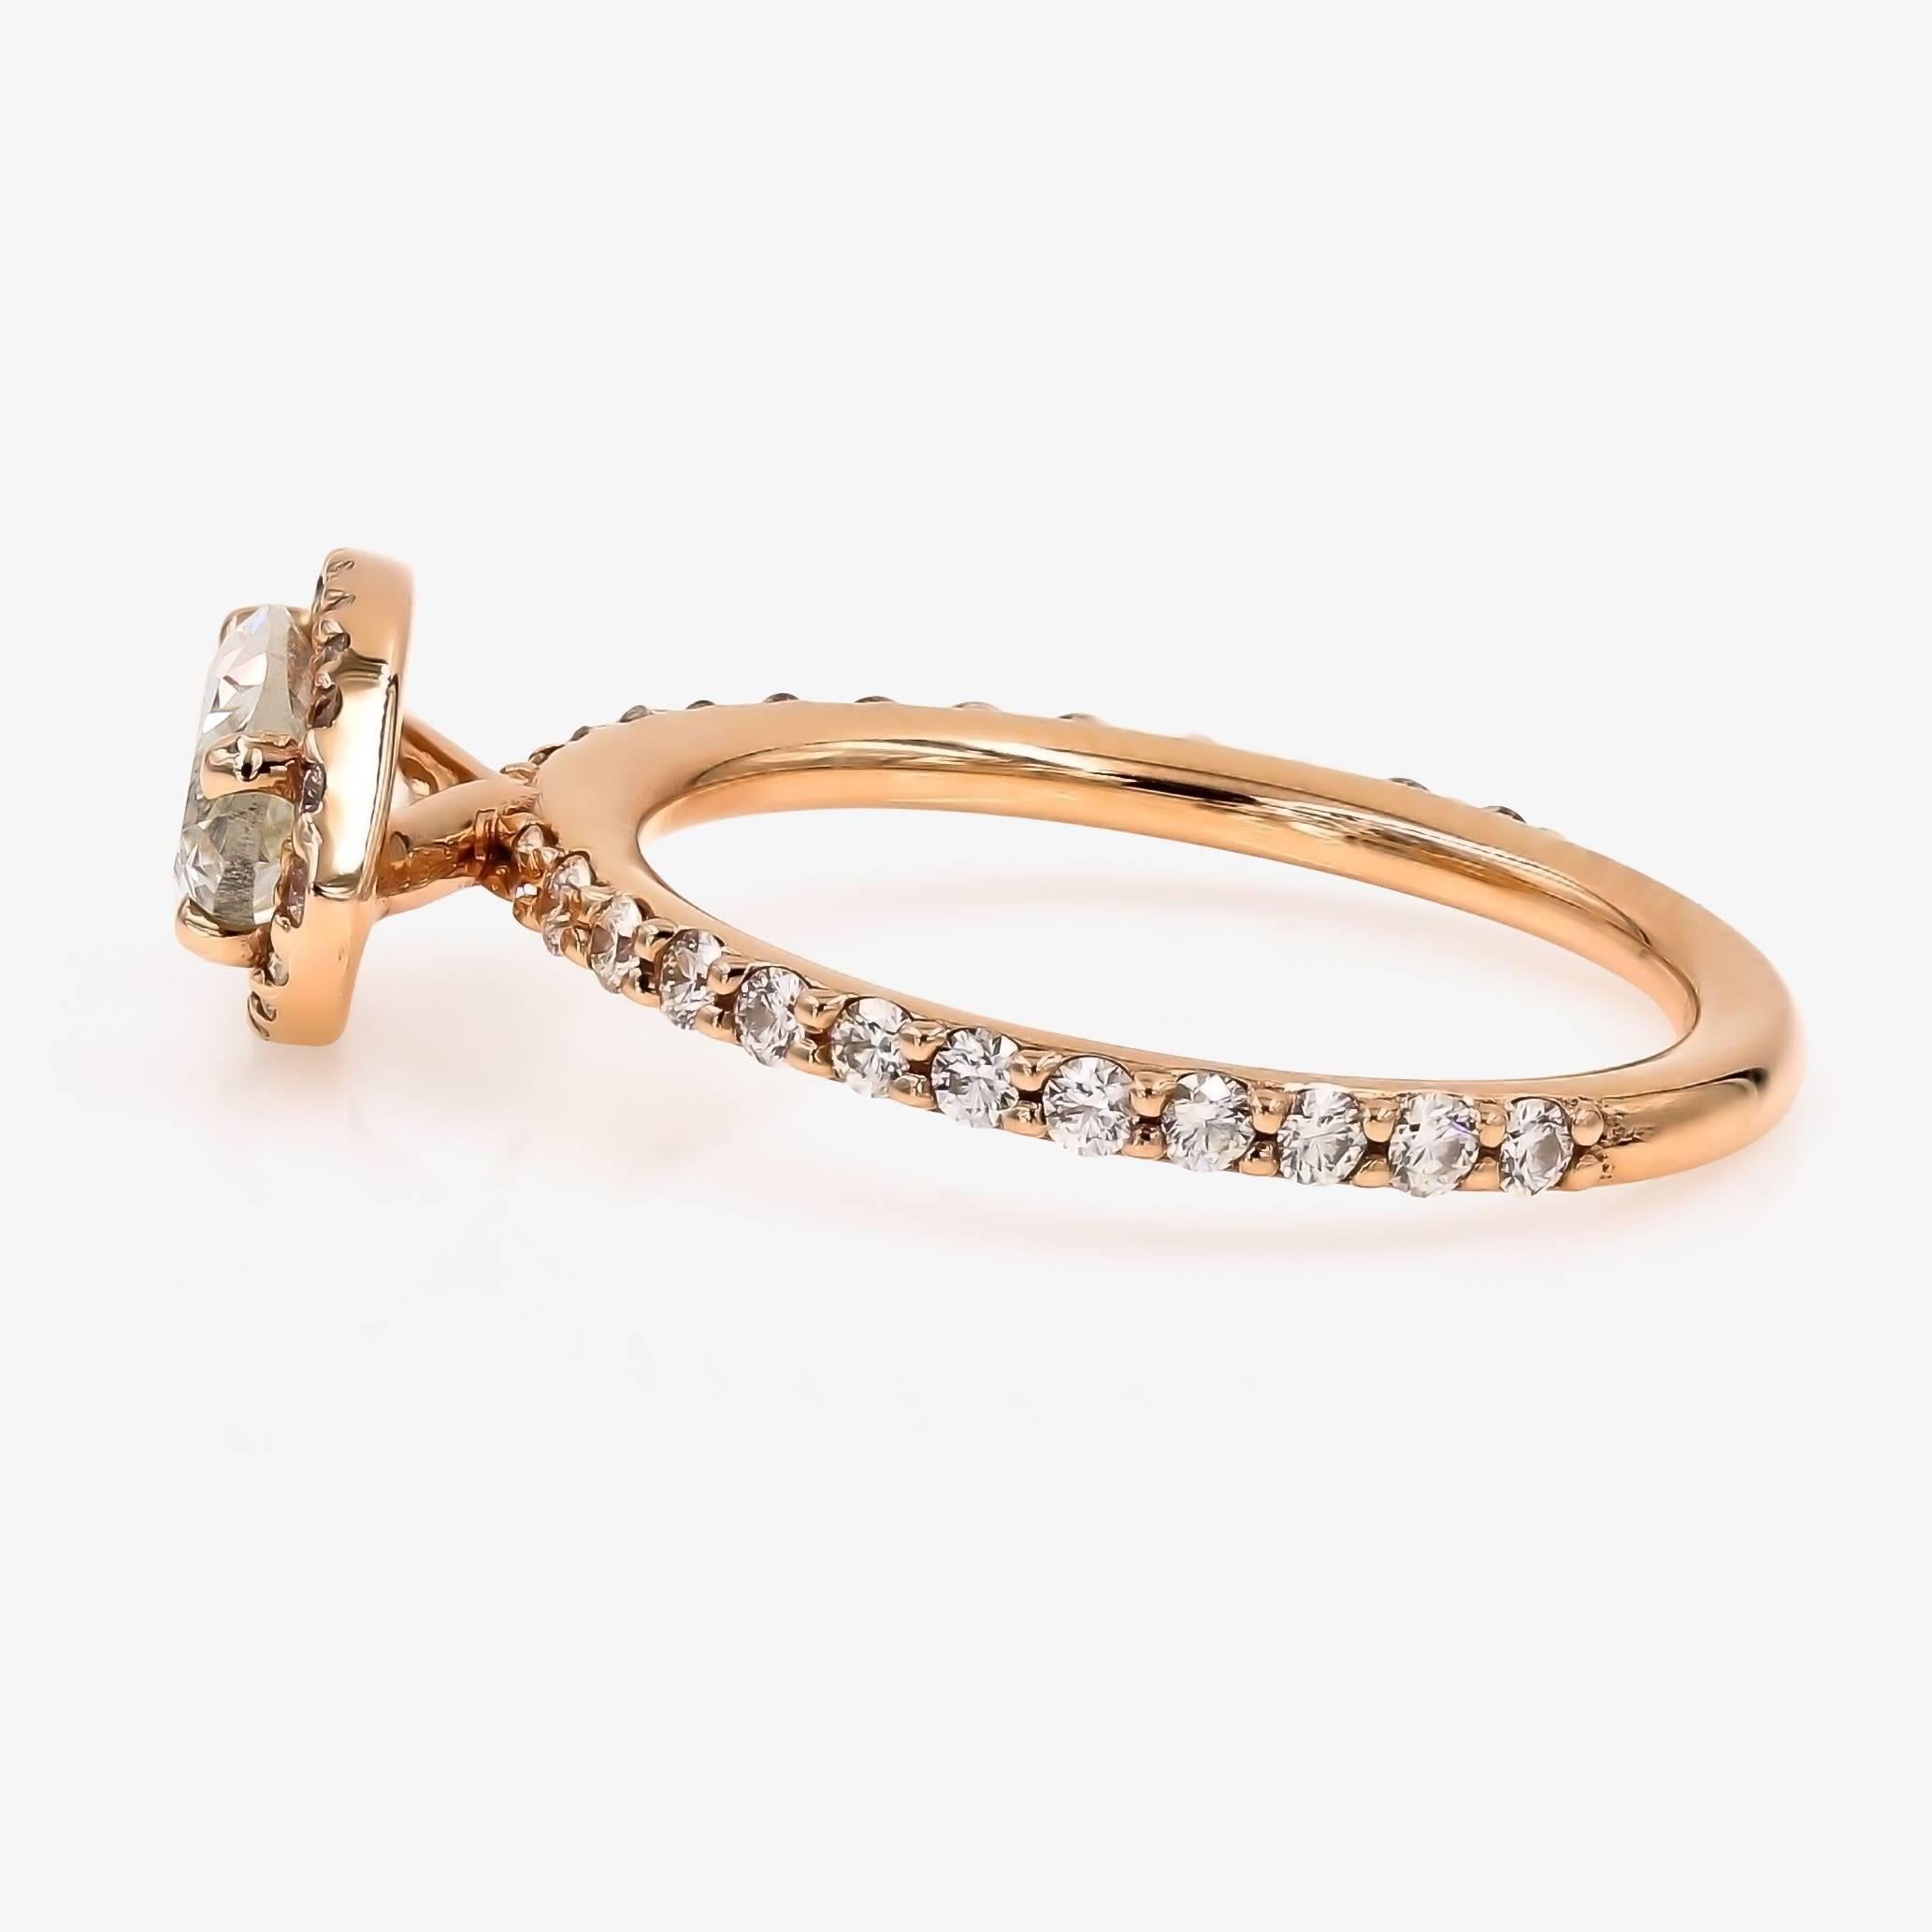 Marquise Cut GIA Certified 1.51cts. Marquise & Ideal Cut Round Diamond Ring in 18kt Rose Gold